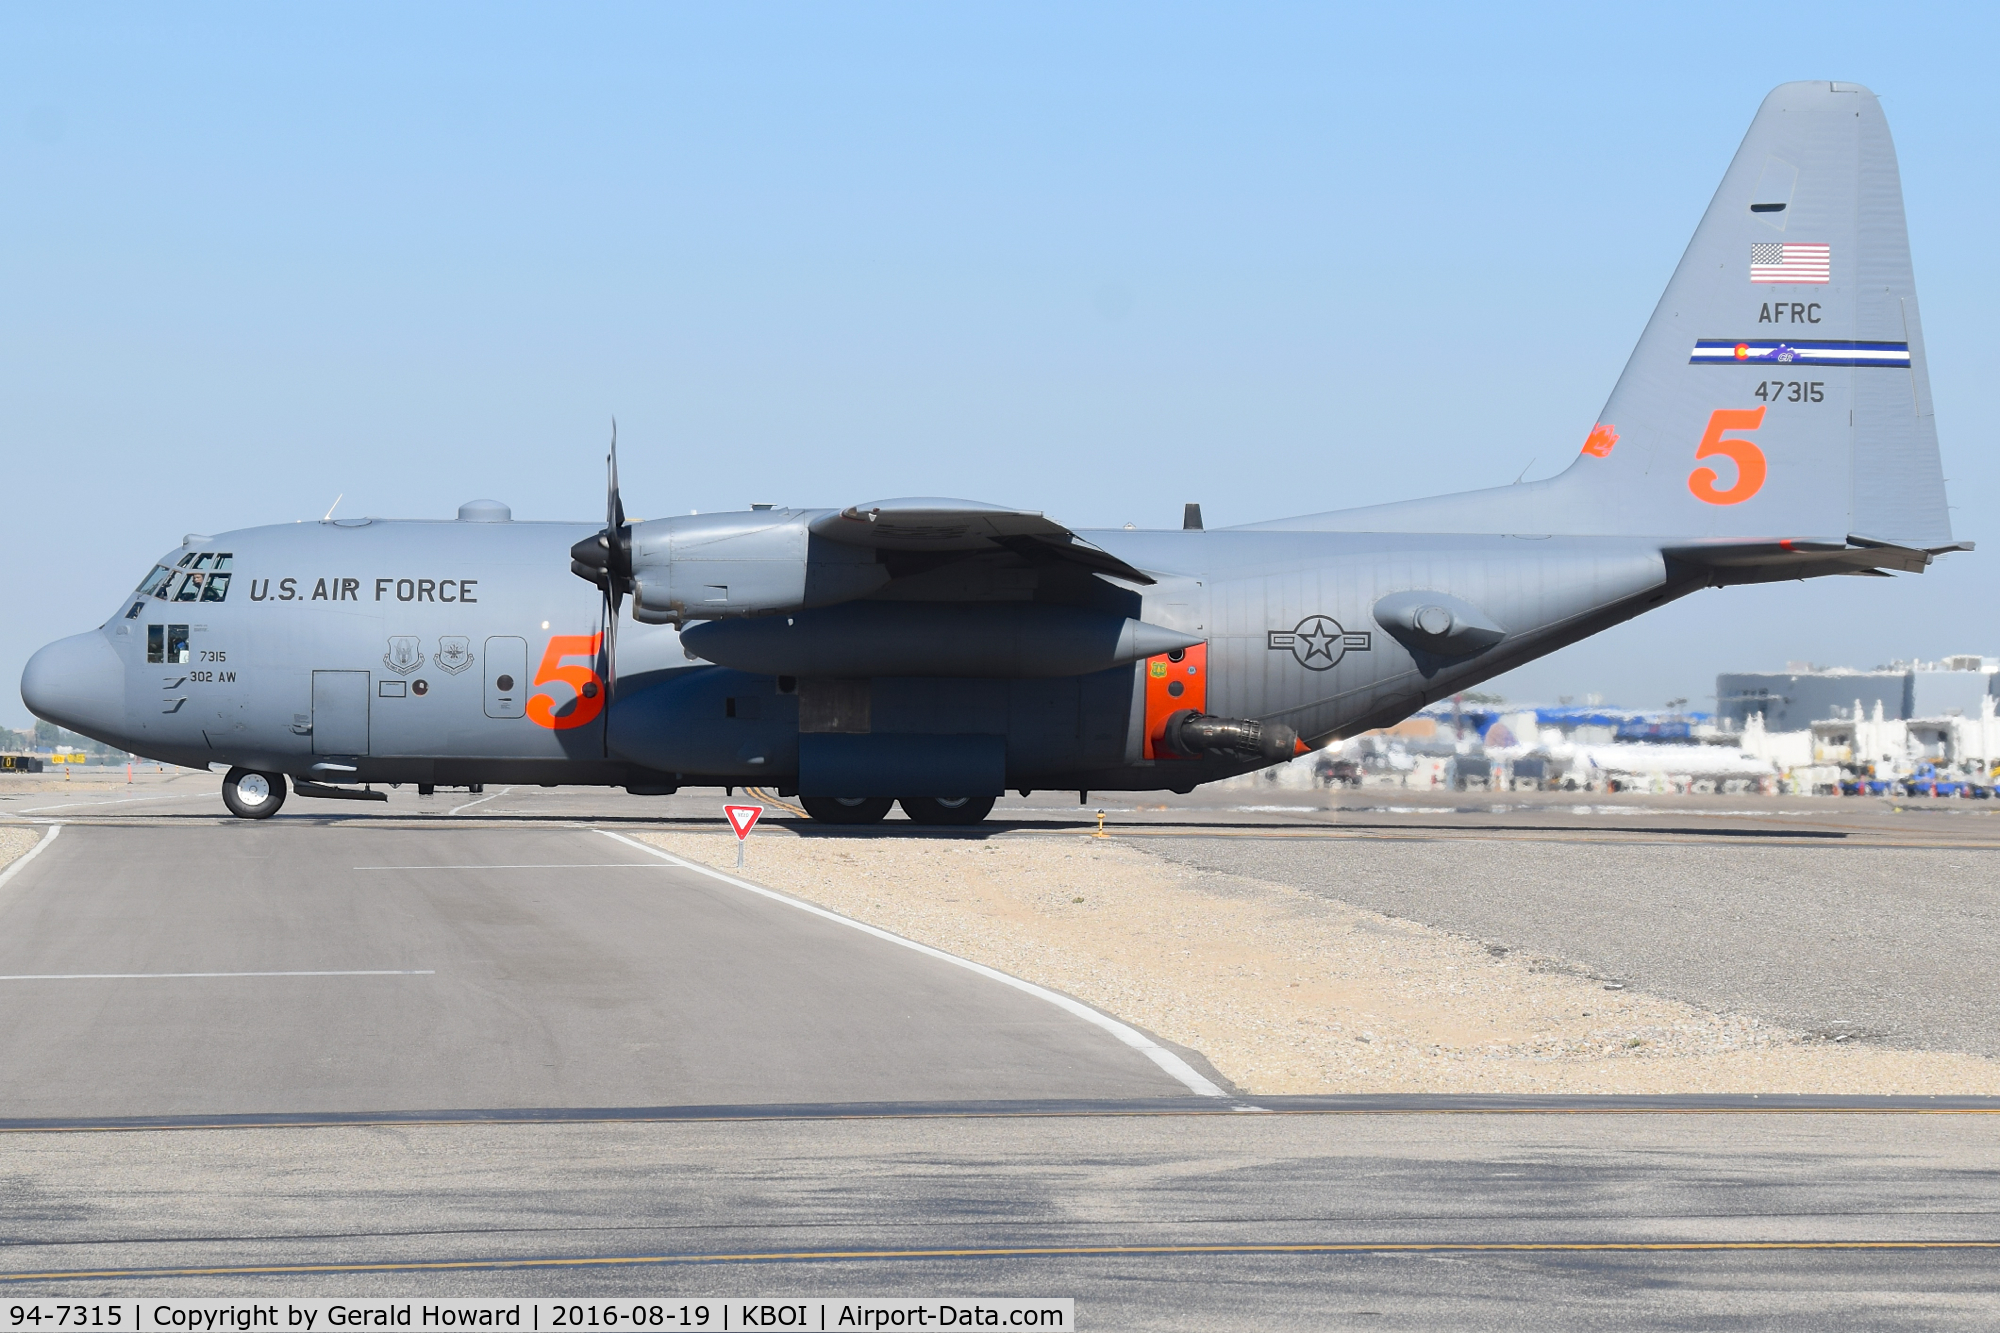 94-7315, Lockheed C-130H C/N 382-5389, Tanker 5 taxing from NIFC ramp to RWY 28R. Equipped with MAFFS. 302nd Air Wing – Peterson AFB, CO